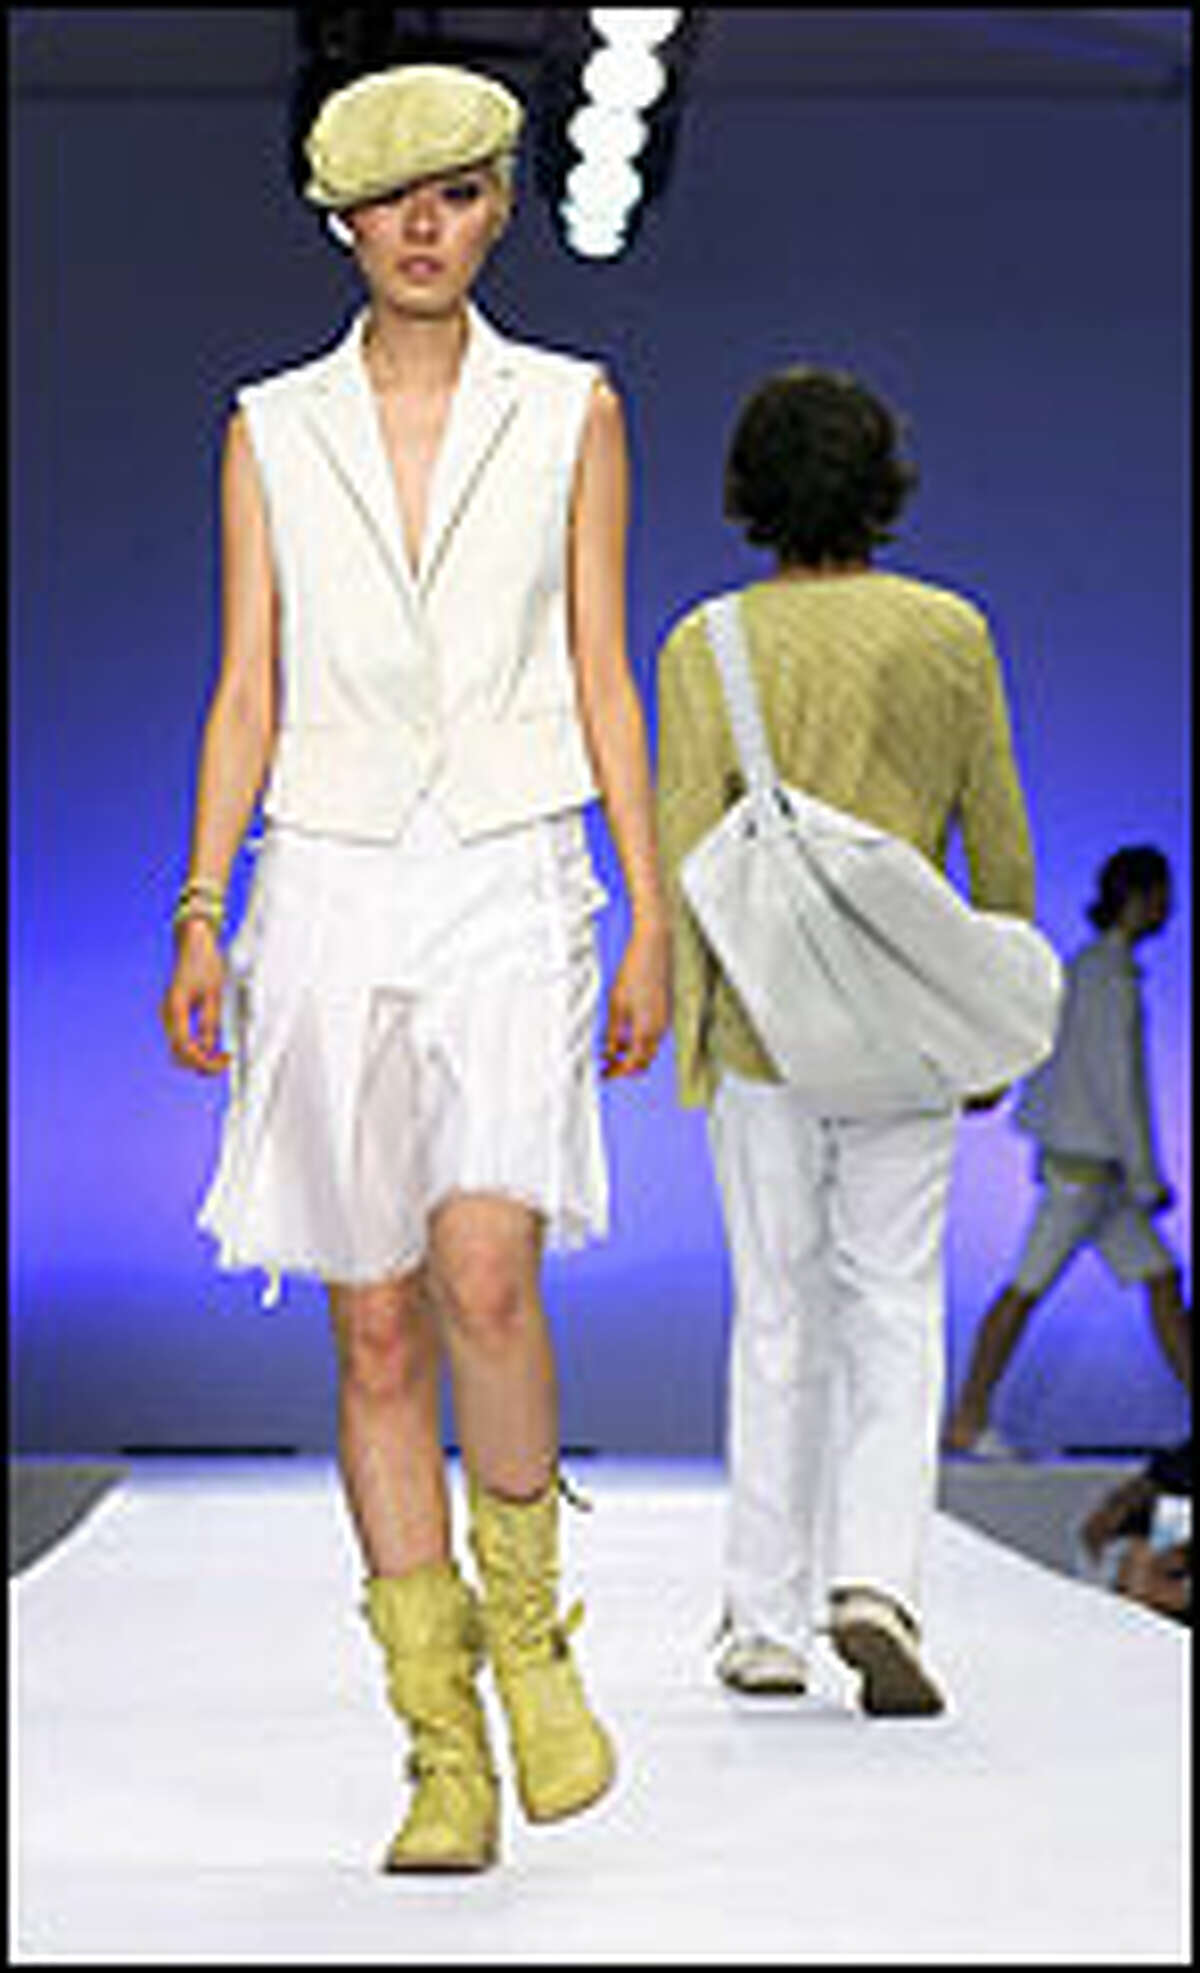 New for spring from Kenneth Cole is a white outfit with a flowy skirt. Whites, floral designs and looser fitting outfits are favored by retailers.